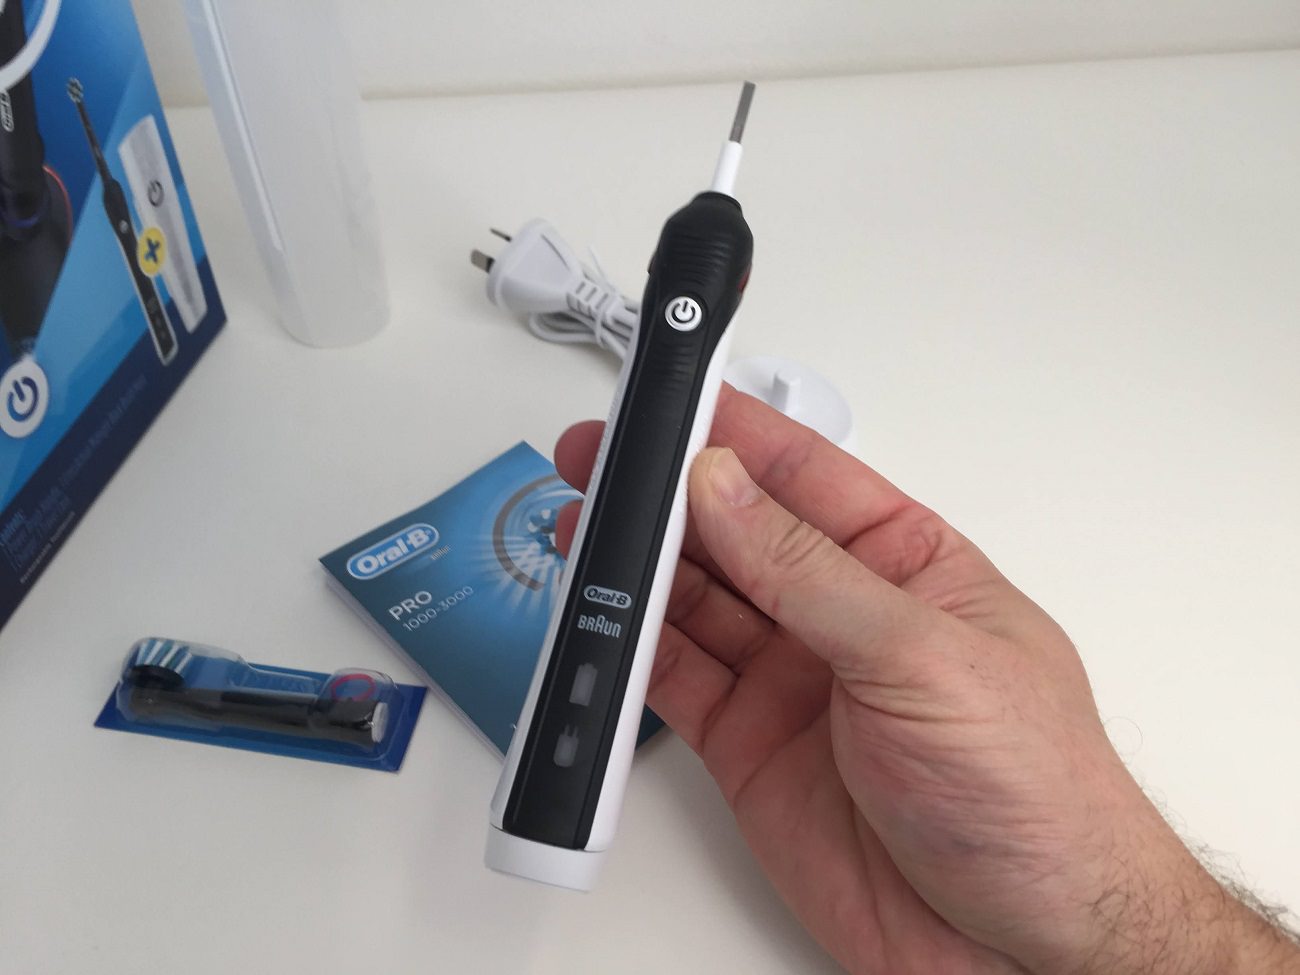 Holding the Oral-B Pro 2 2000 Electric Toothbrush